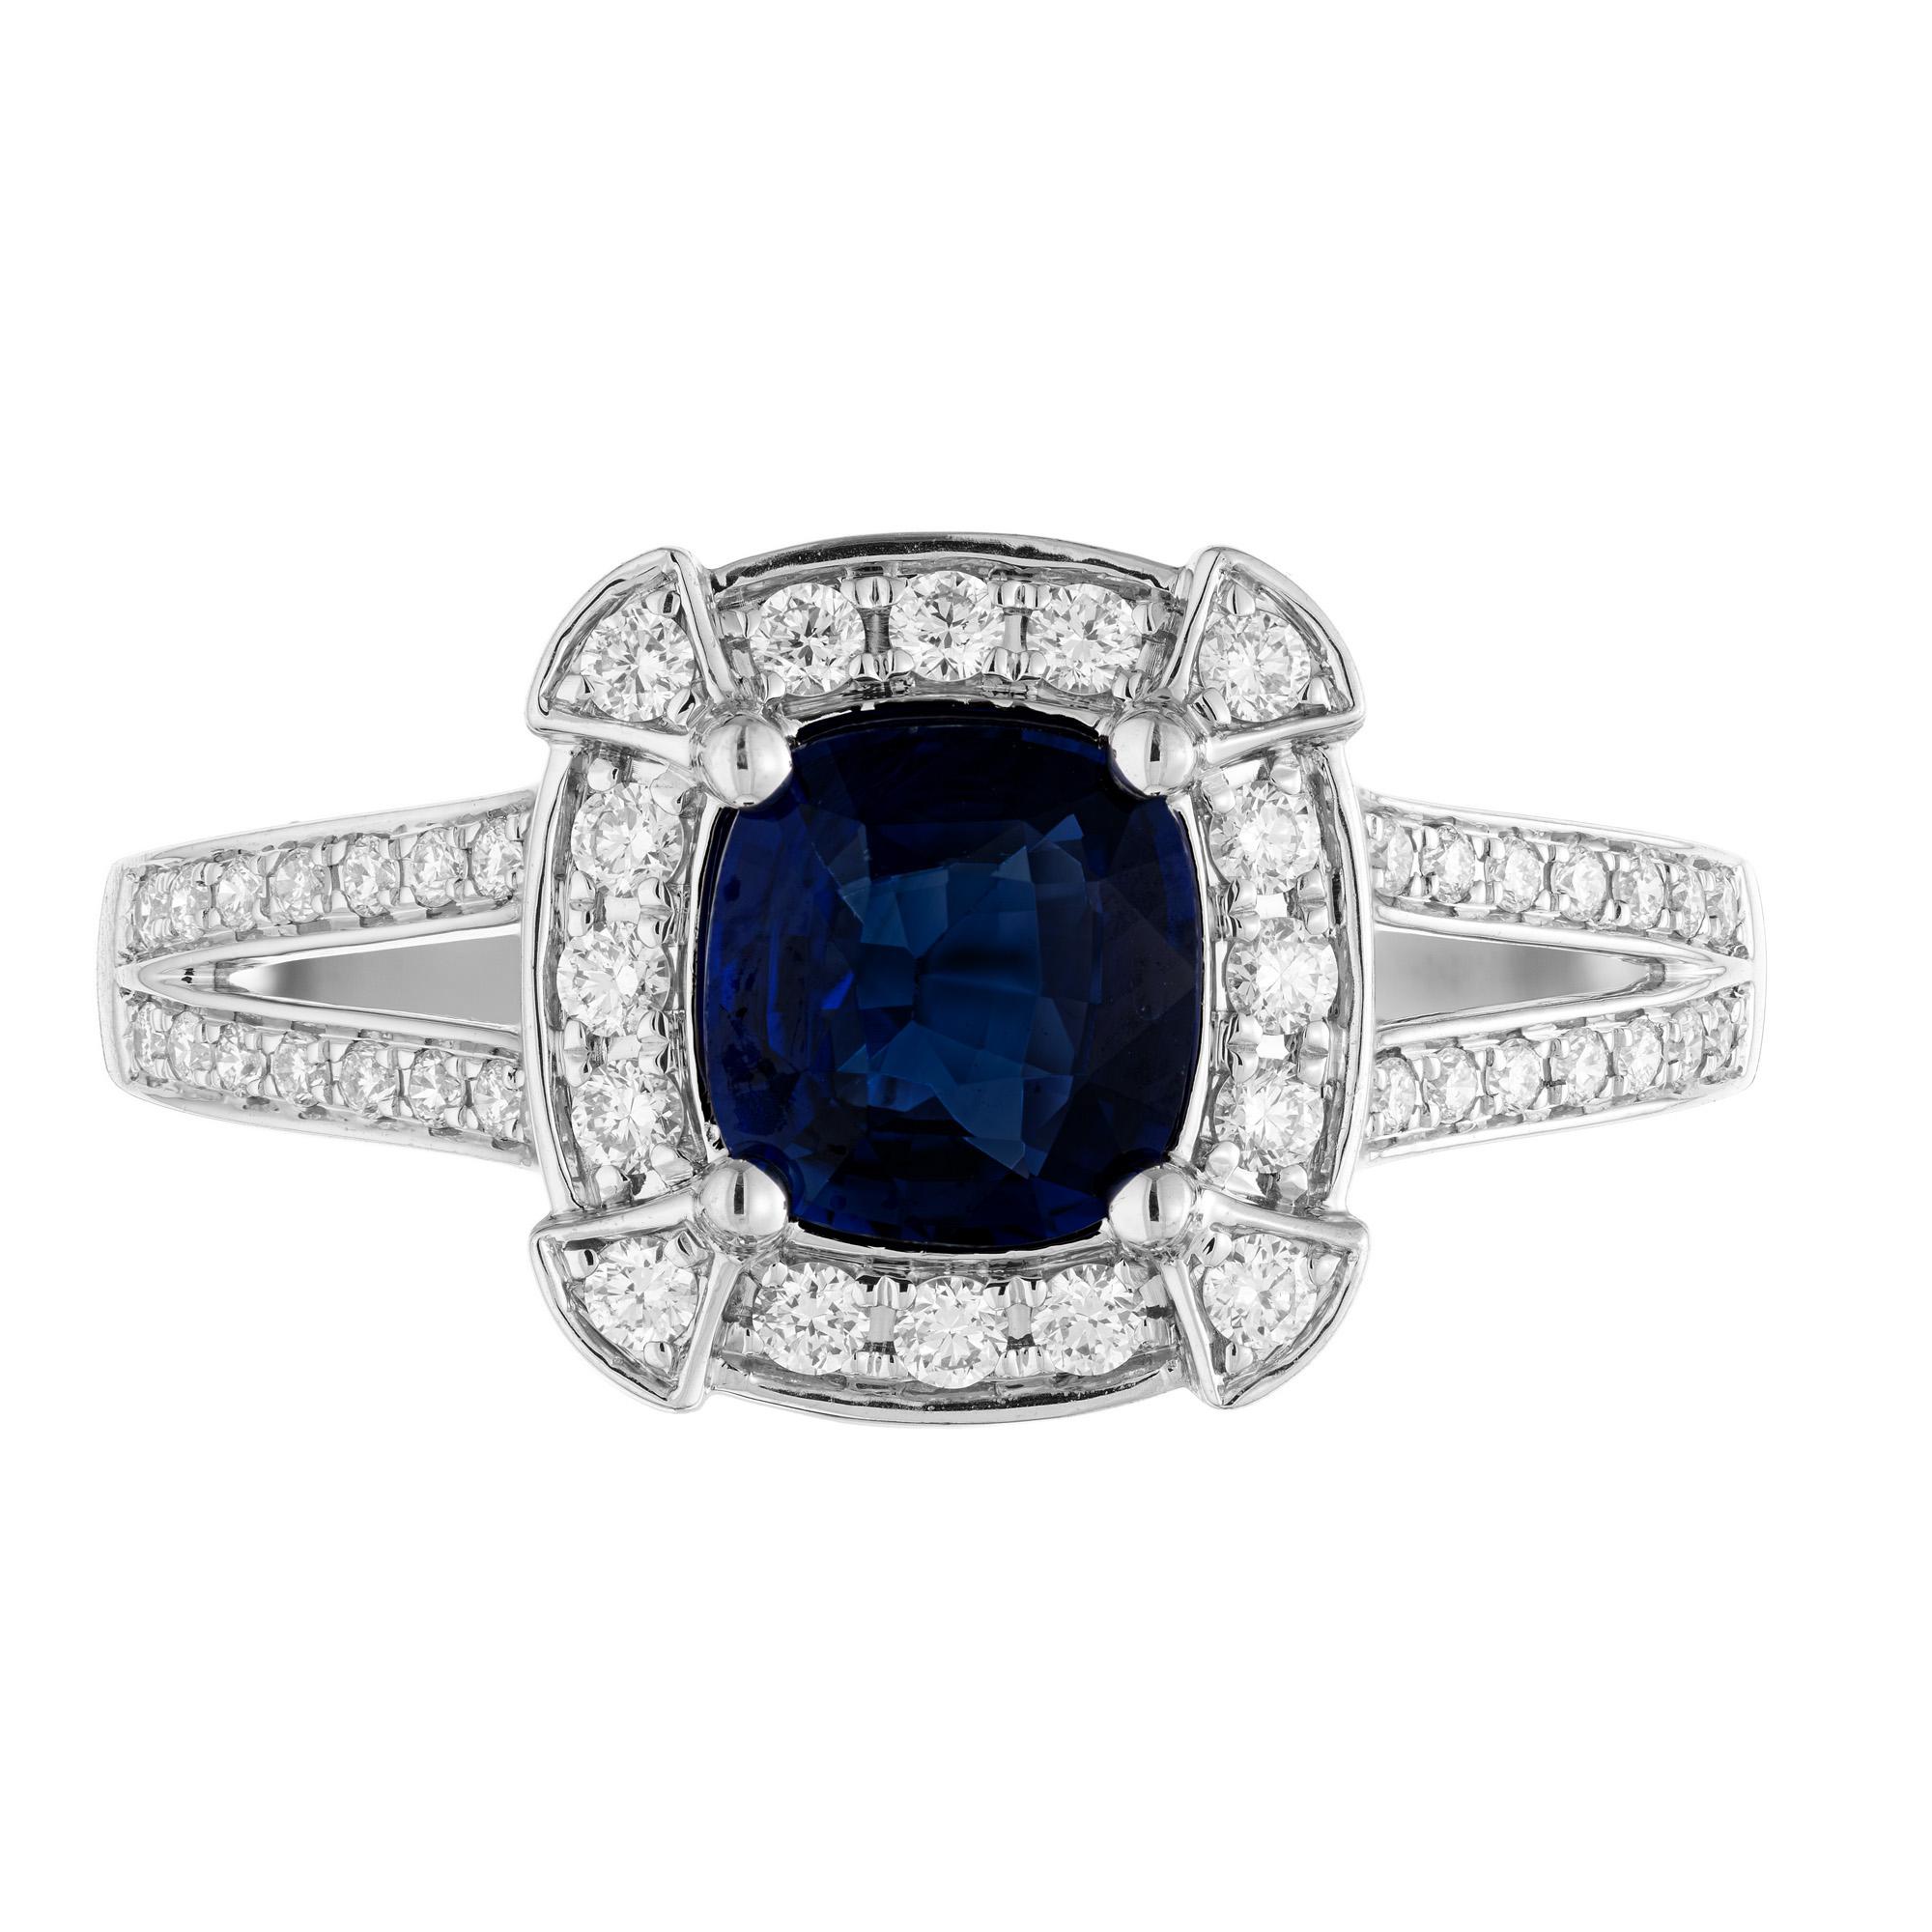 Velvety blue GIA certified cushion cut sapphire and diamond engagement ring. This exquisite piece begins with a 1.01ct cushion cut sapphire, mounted in a 14k white gold split shank setting. The diamond is accented with a halo or round brilliant cut